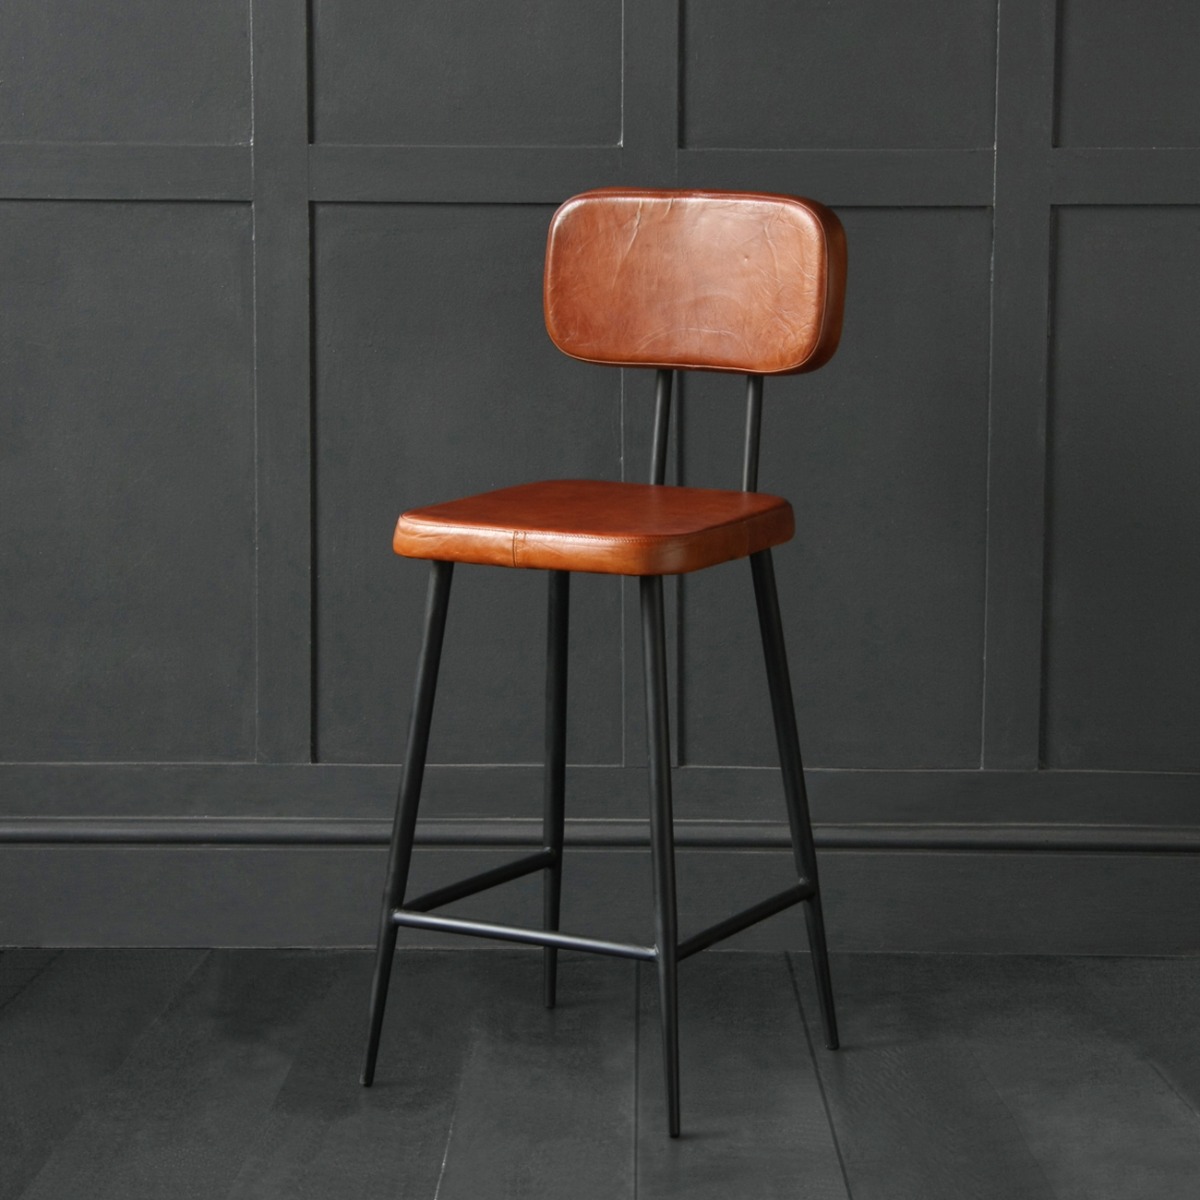 Our Memphis Bar Stools make durability a priority!